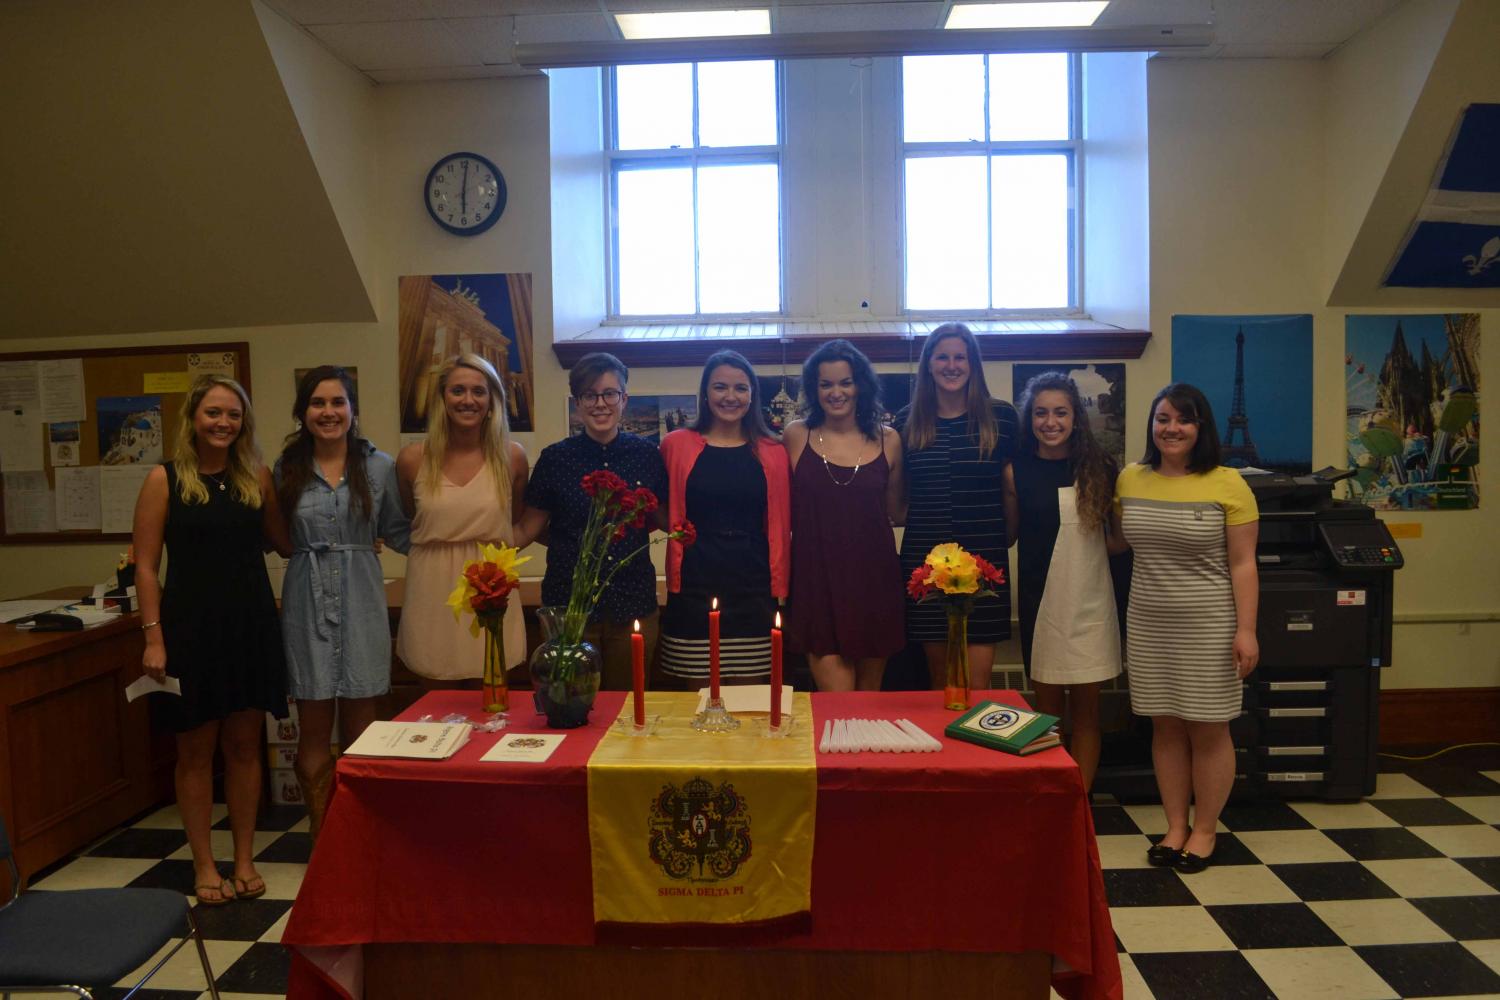 New inductees (from left to right): Alexis Ahern ’19, Alicia Chouinard ’17, Cecilia Chrisom ’17, Emily Craig ’19, Katie Duane ’17,

Elizabeth Moore ’19, Madison Sarra ’19, Peyton Wallace ’17, and Amanda Young ’17.